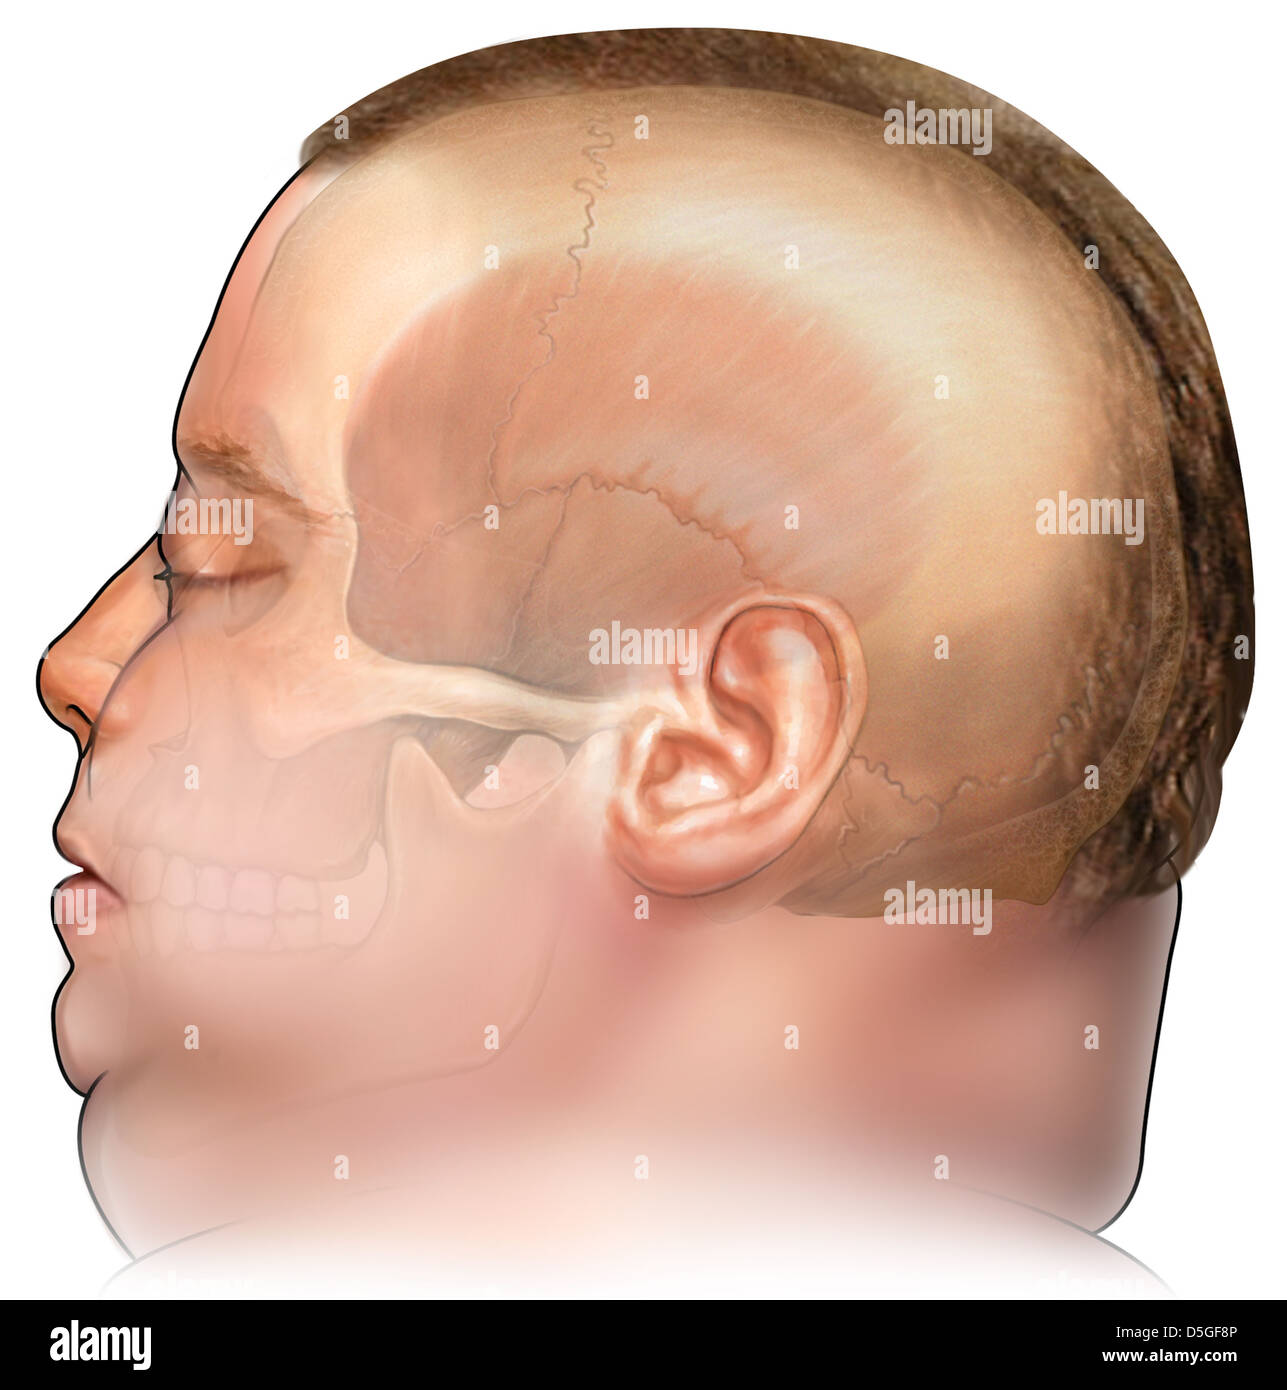 Lateral Head and Skull of Obese White Male Stock Photo